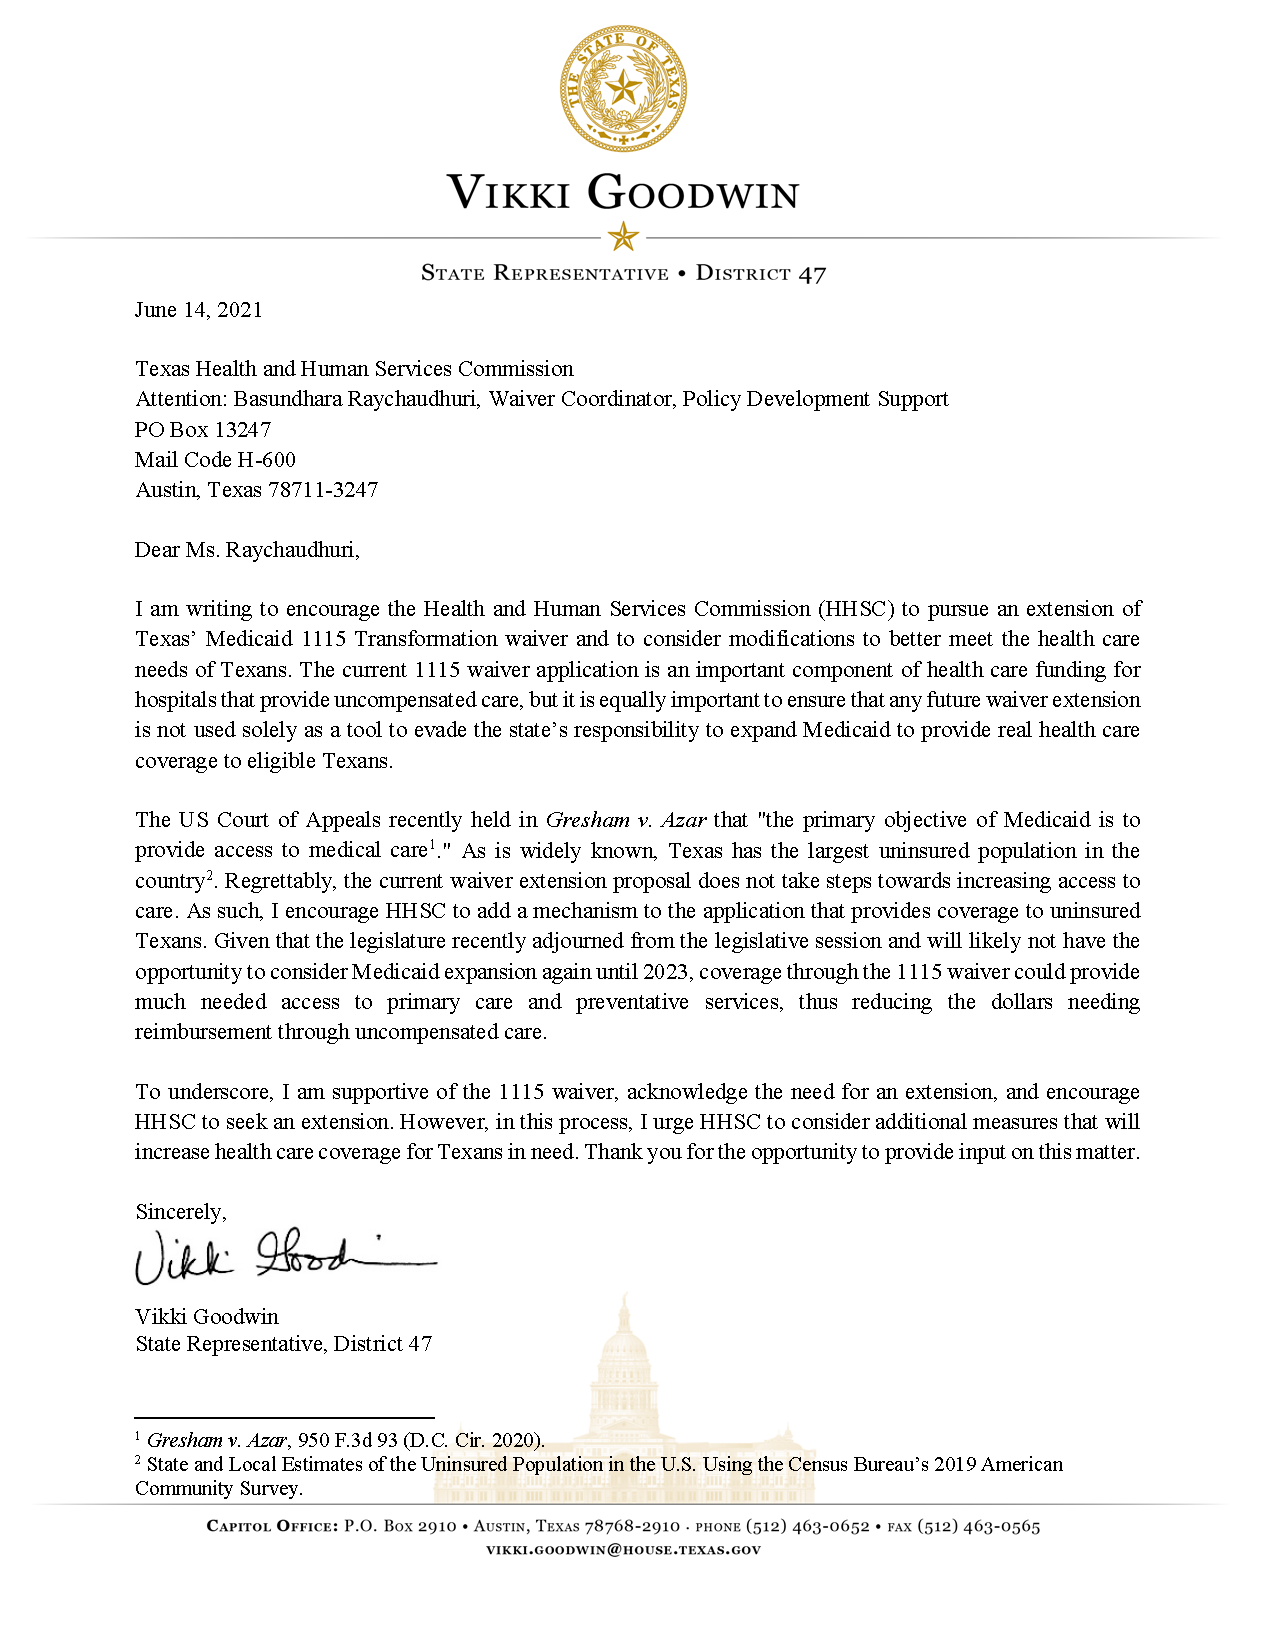  Yesterday I submitted comments to the Health and Human Services Commission requesting an extension of the Medicaid 1115 waiver. While I support extending the waiver, I also encourage HHSC to modify their application to include a mechanism to provide